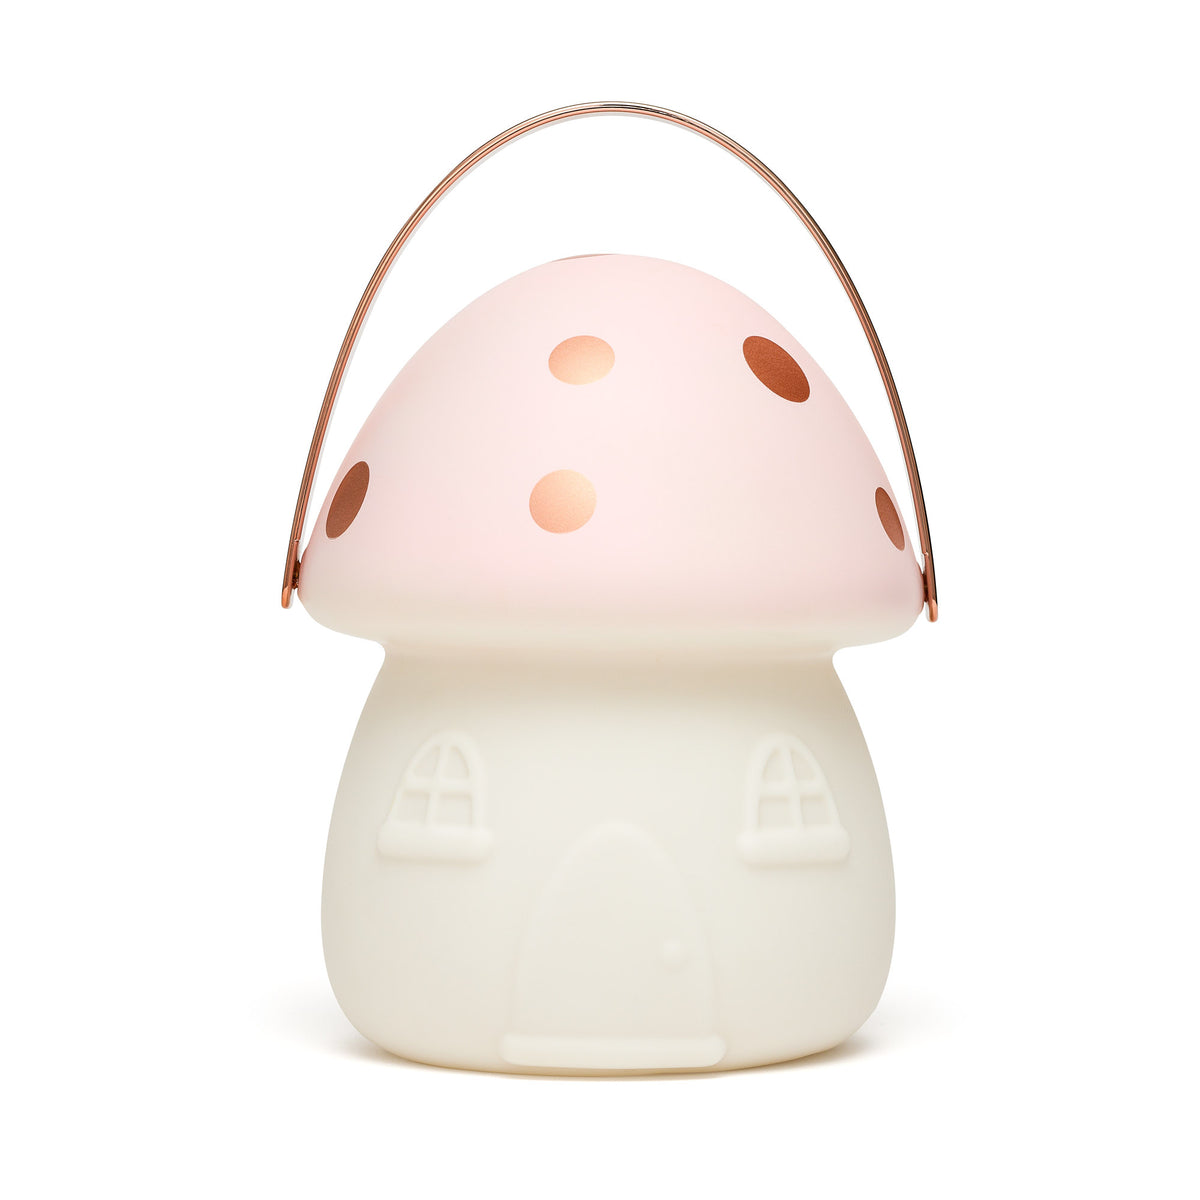 Fairy House Carry Lantern - Pink &amp; Rose Gold PRE-ORDER NOW